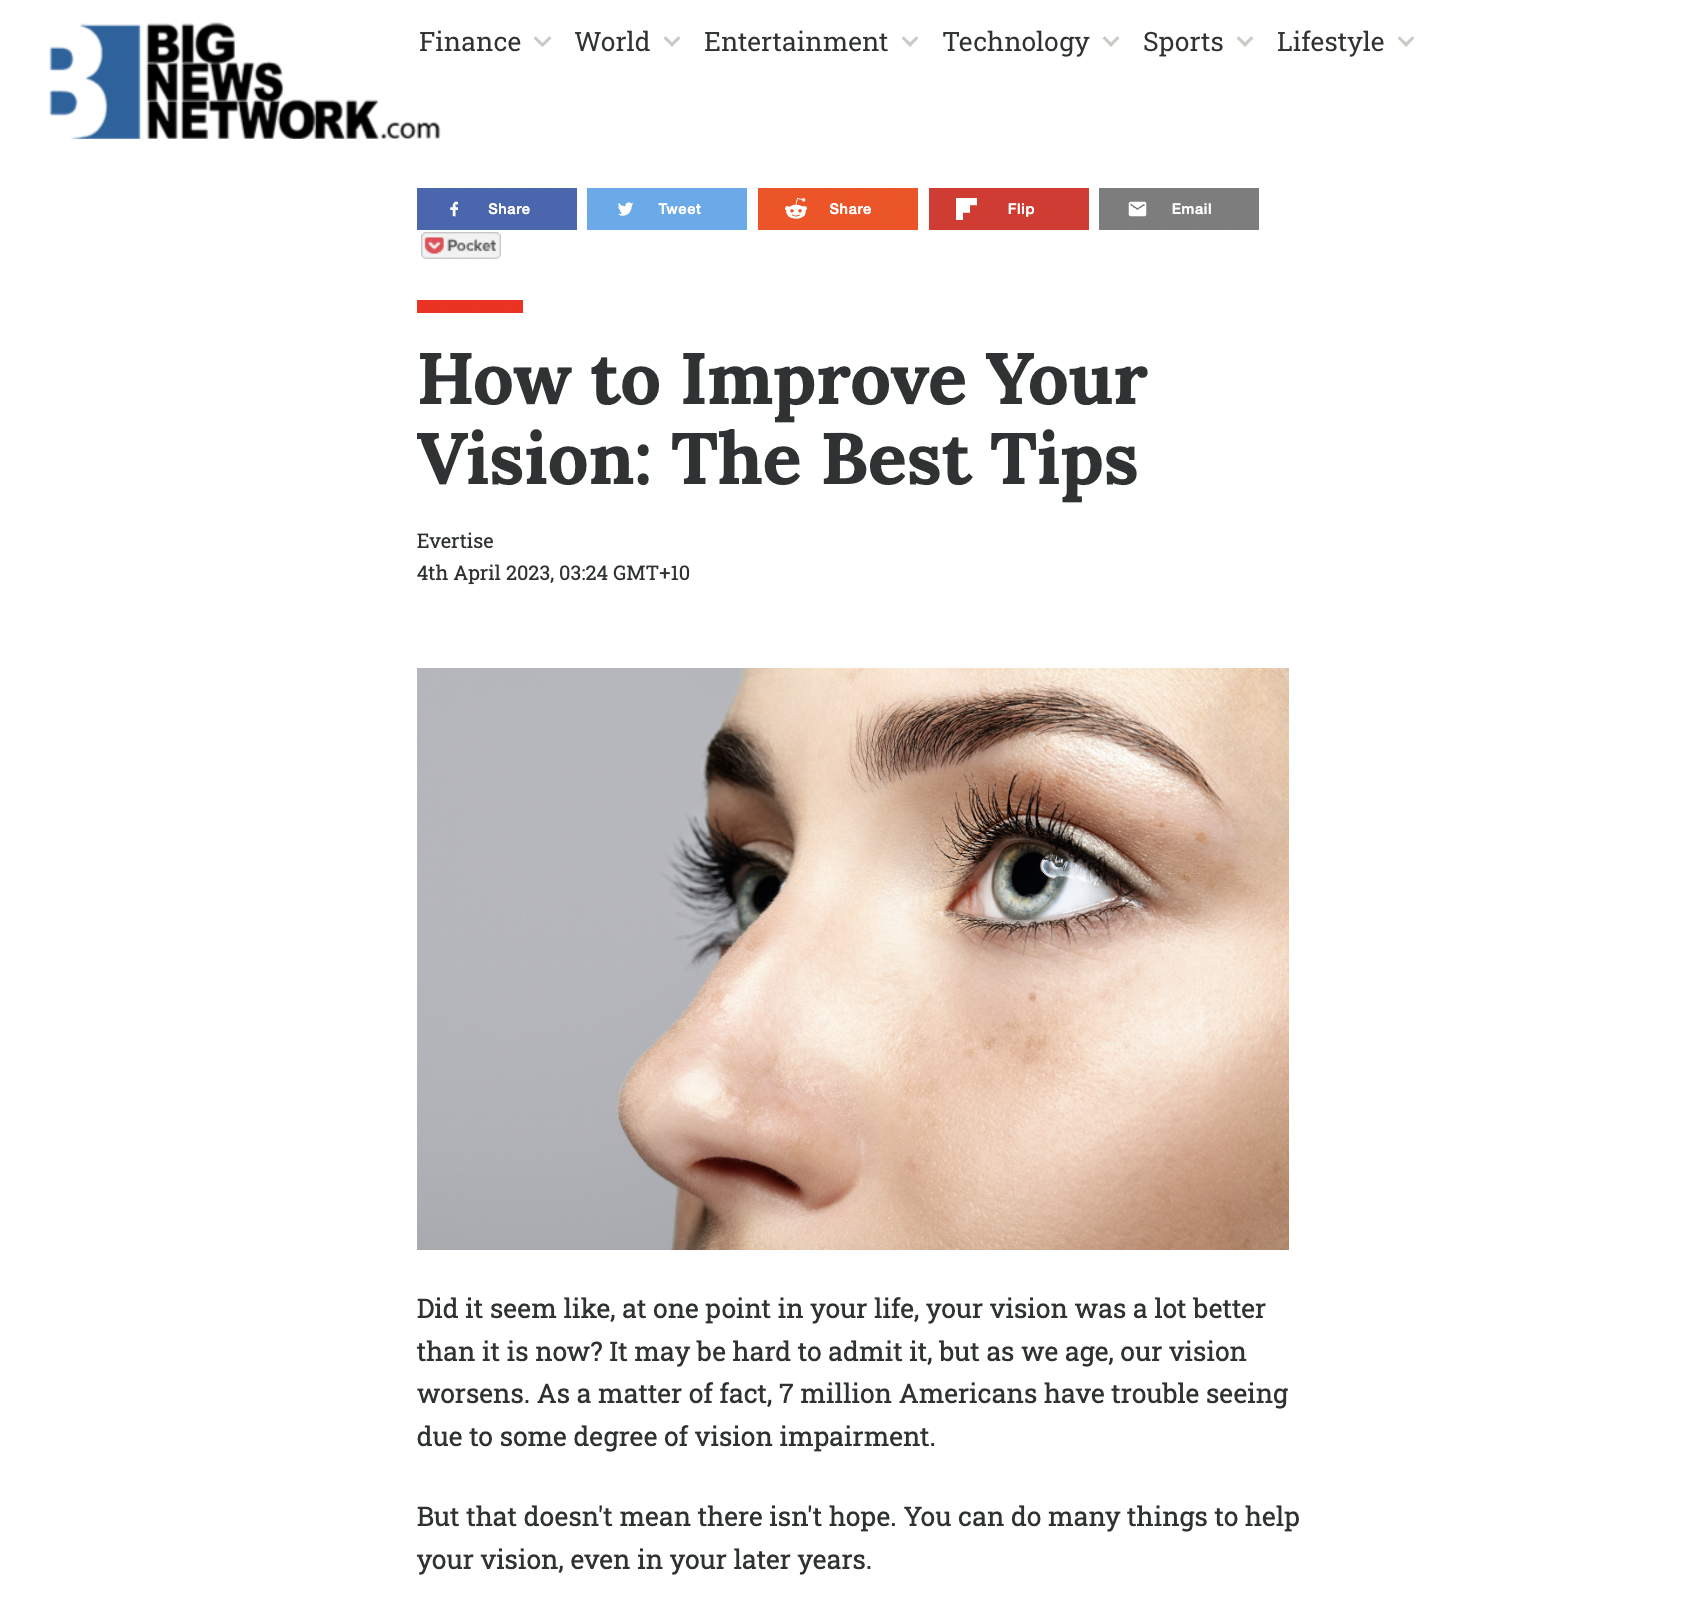 Screenshot of article by Big News Network.com of digital article on improving vision